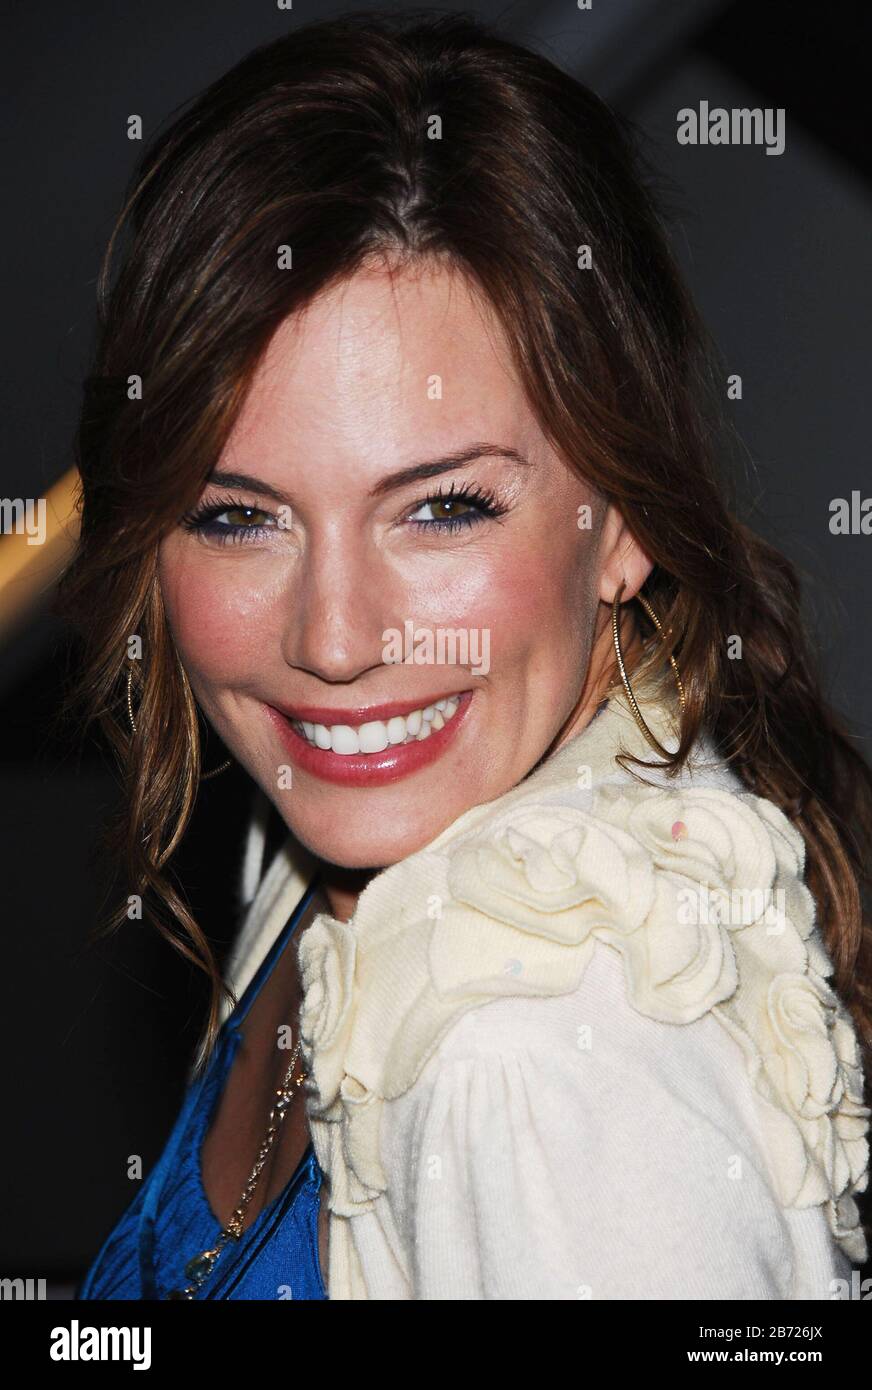 Krista Allen at the Los Angeles Premiere of 'Keeping Up With The Steins' held at the Pacific Design Center in West Hollywood, CA. The event took place on Monday, May 8, 2006.  Photo by: SBM / PictureLux - All Rights Reserved - File Reference # 33984-3132SBMPLX Stock Photo